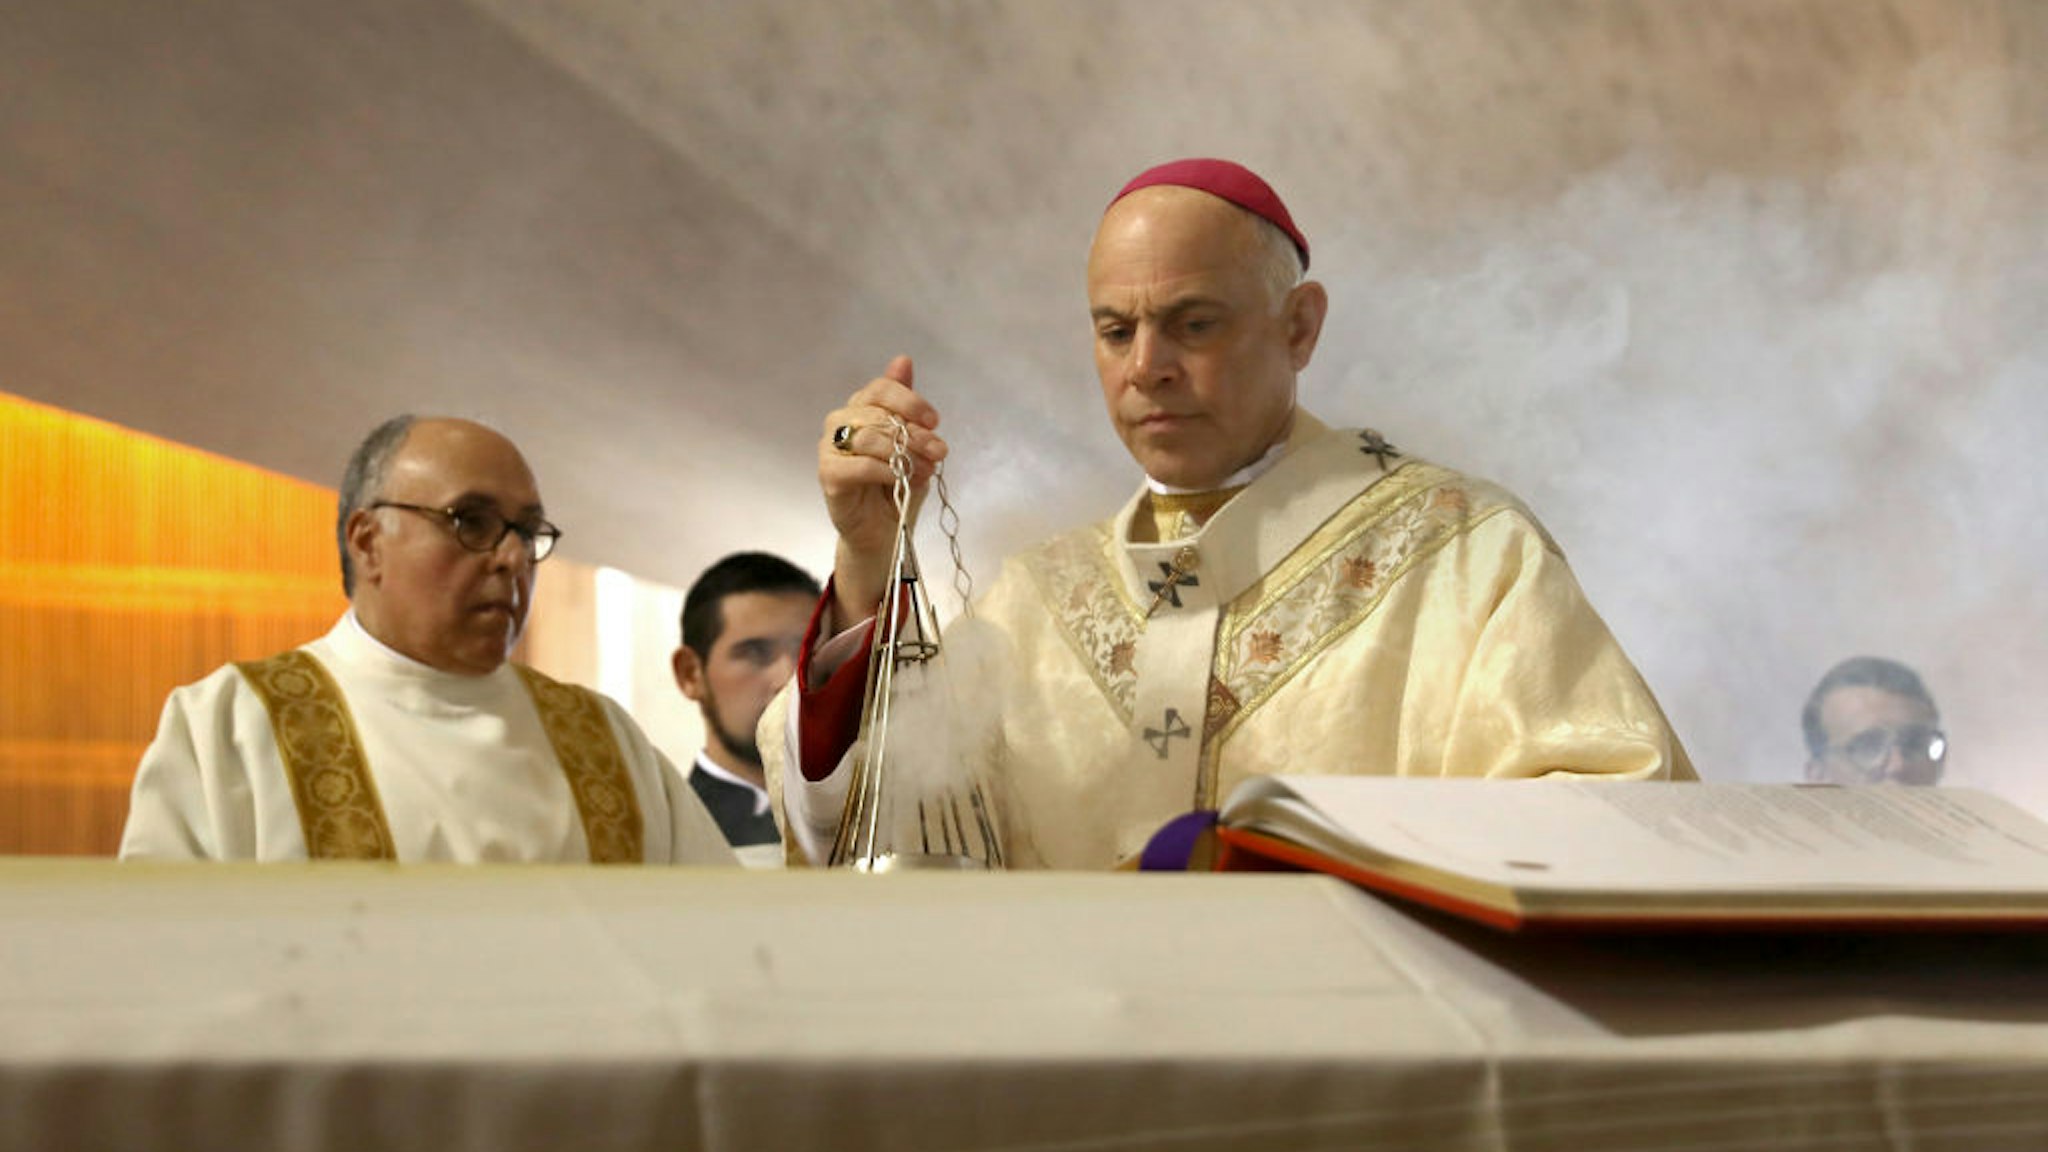 Archbishop of San Francisco, the Most Reverend Salvatore J. Cordileone leads the prayer of commendation during the funeral Mass of archbishop emeritus and Cardinal William Joseph Cardinal Levada at the Cathedral of Saint Mary on Thursday, Oct. 24, 2019, in San Francisco, Calif. (Photo By Liz Hafalia/The San Francisco Chronicle via Getty Images)